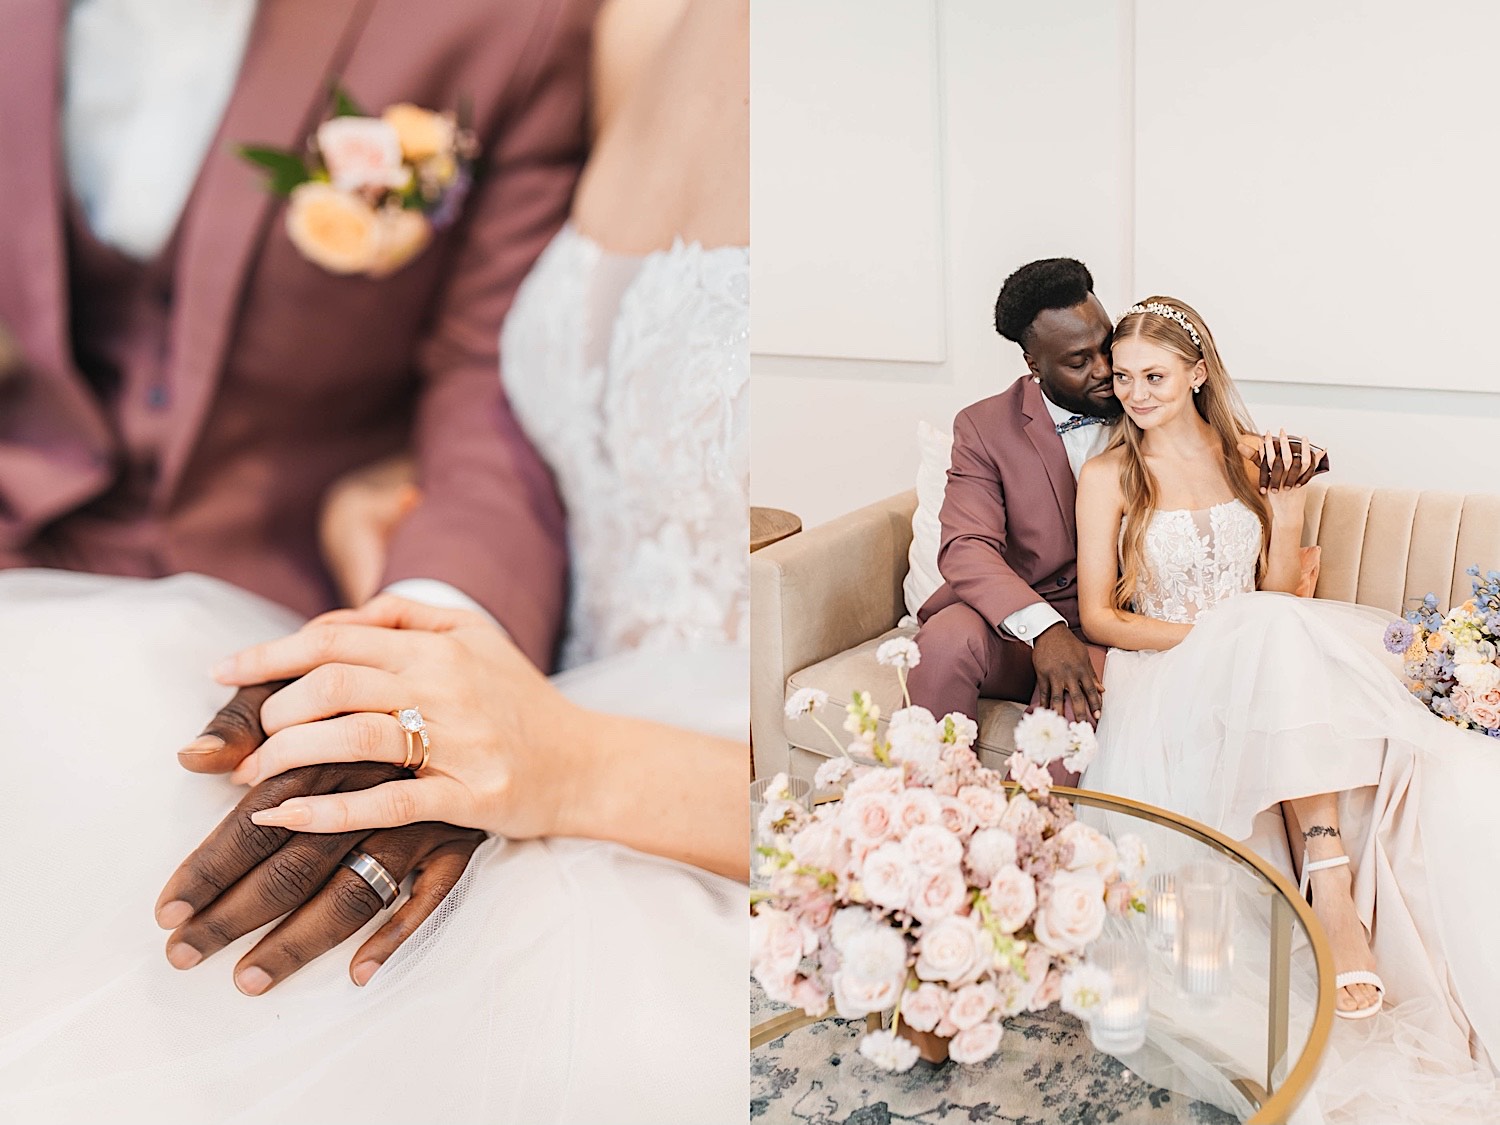 2 photos side by side, the left is a close up photo of a bride and grooms hands holding one another showing off their wedding rings, the right is of the couple sitting on a couch and the groom is about to kiss the bride's cheek